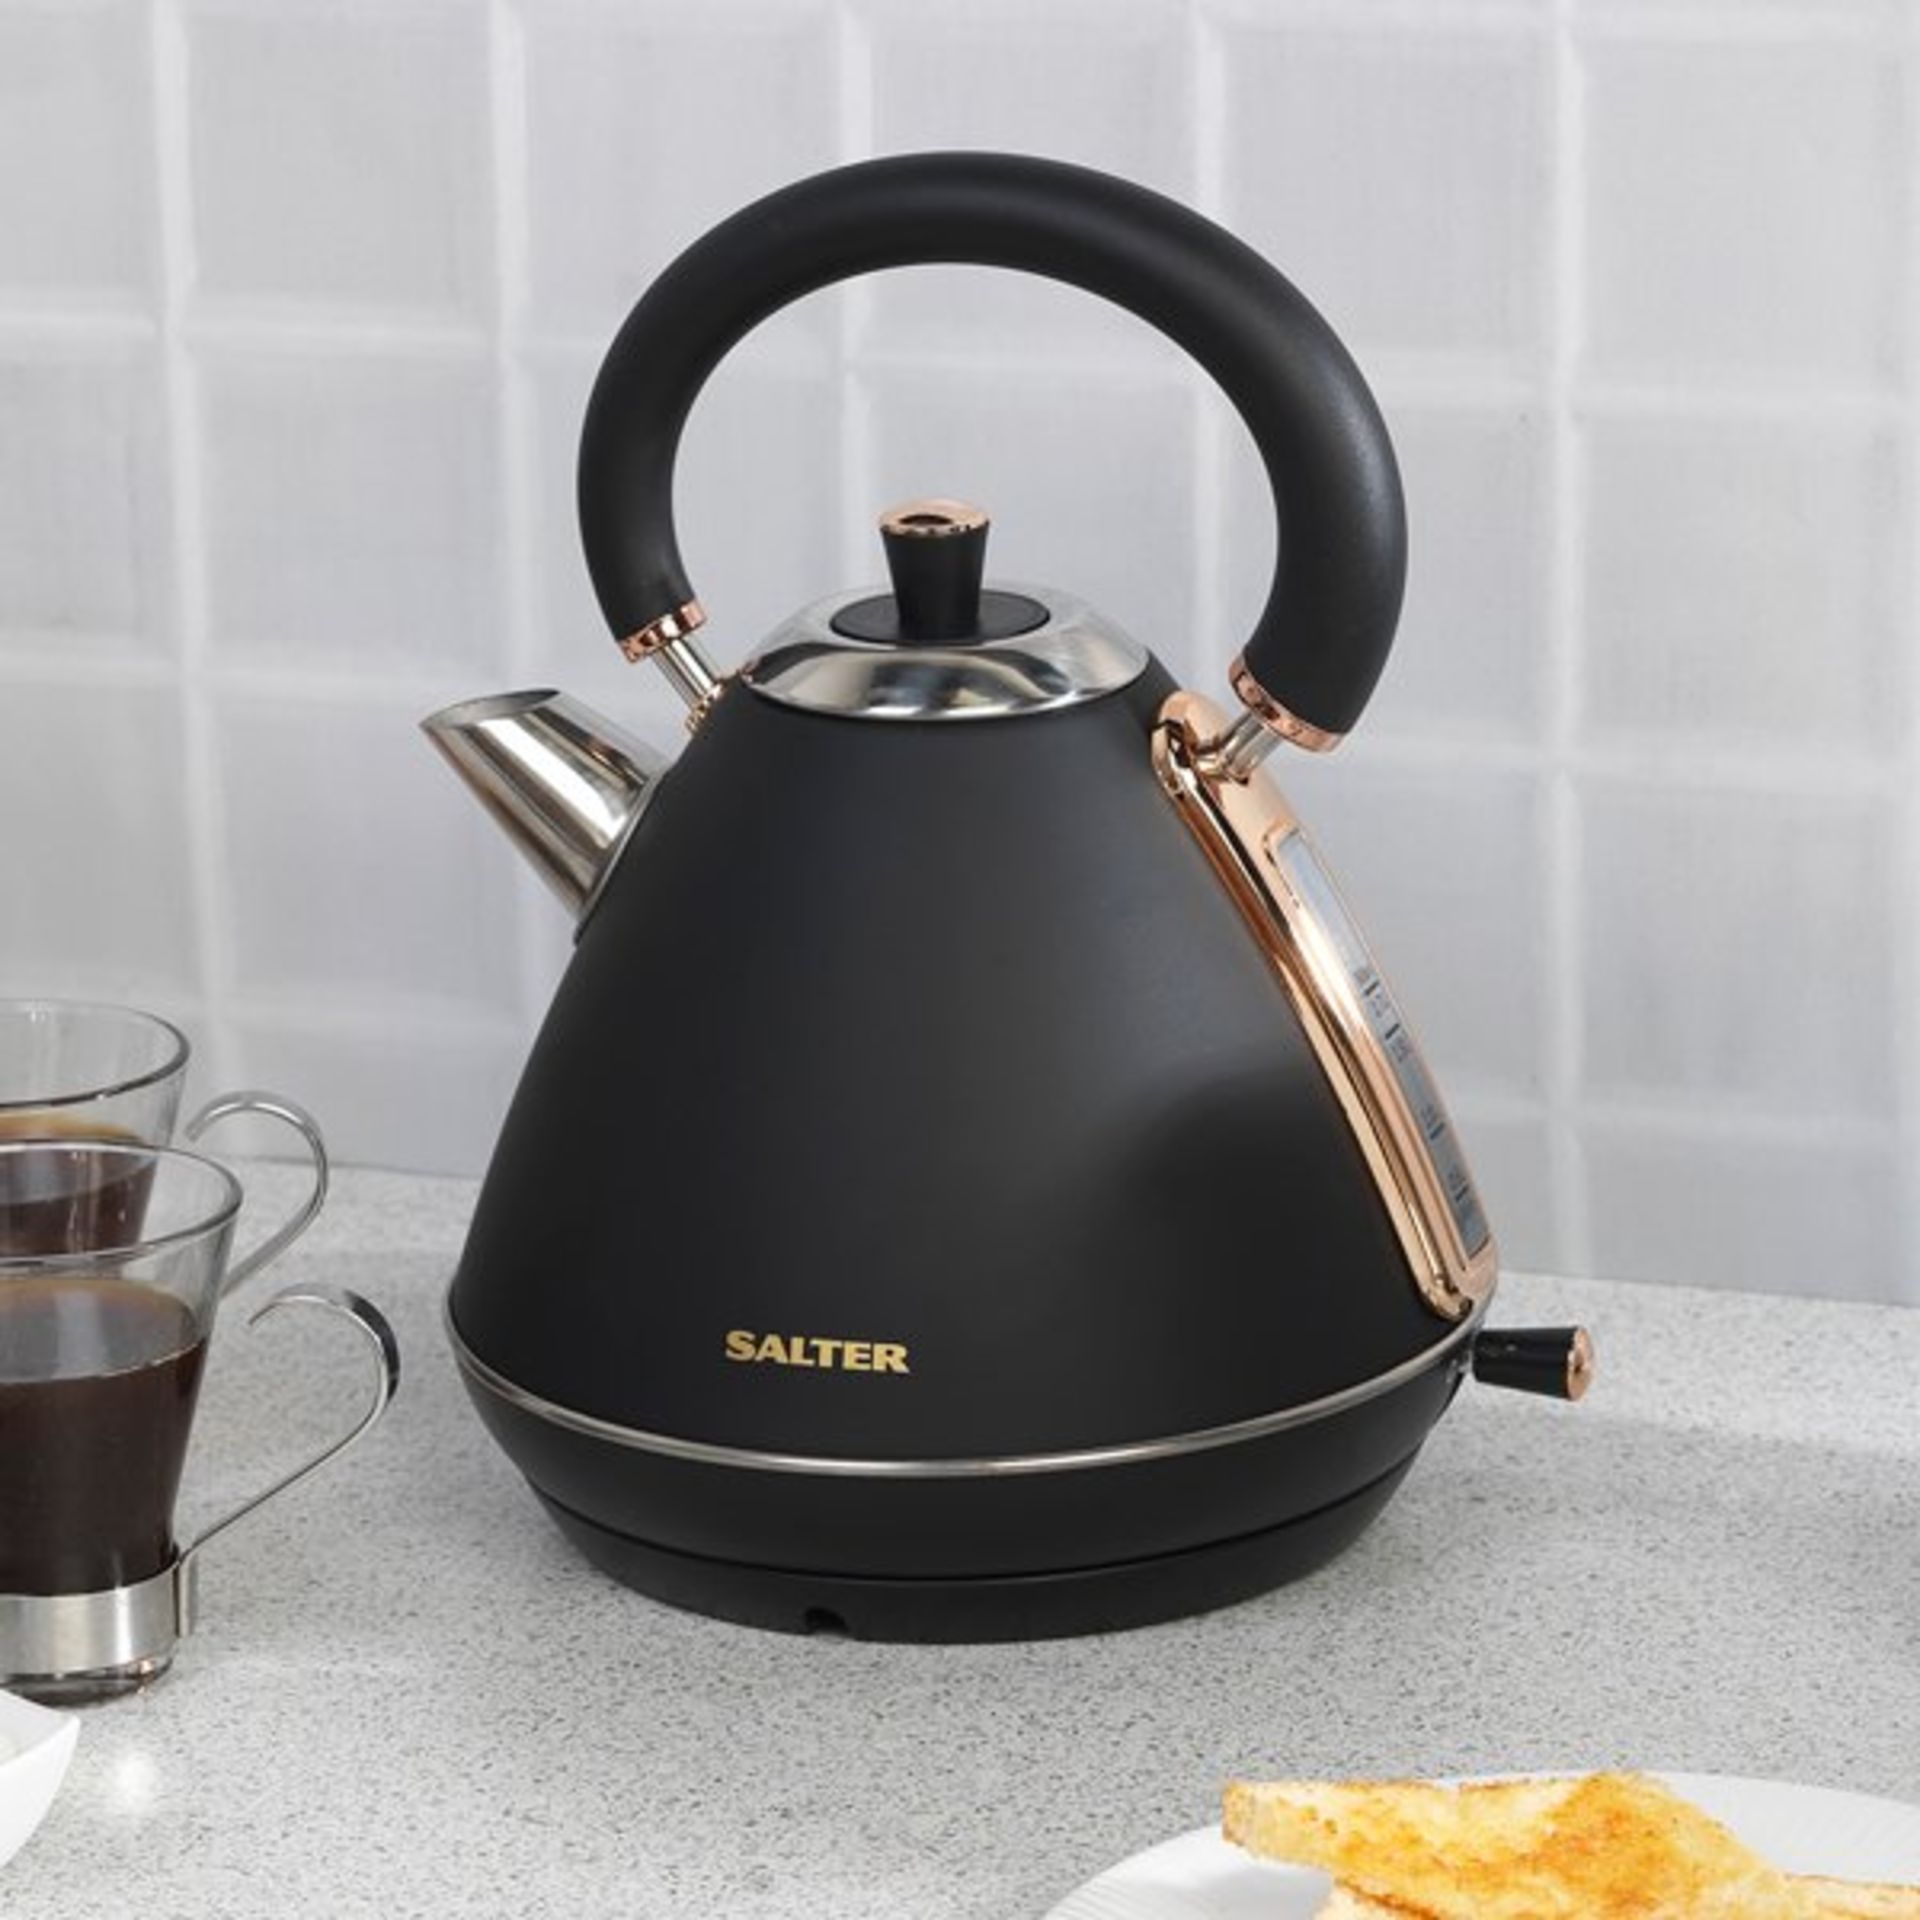 Brand New Salter Rose Gold Pyramid Kettle